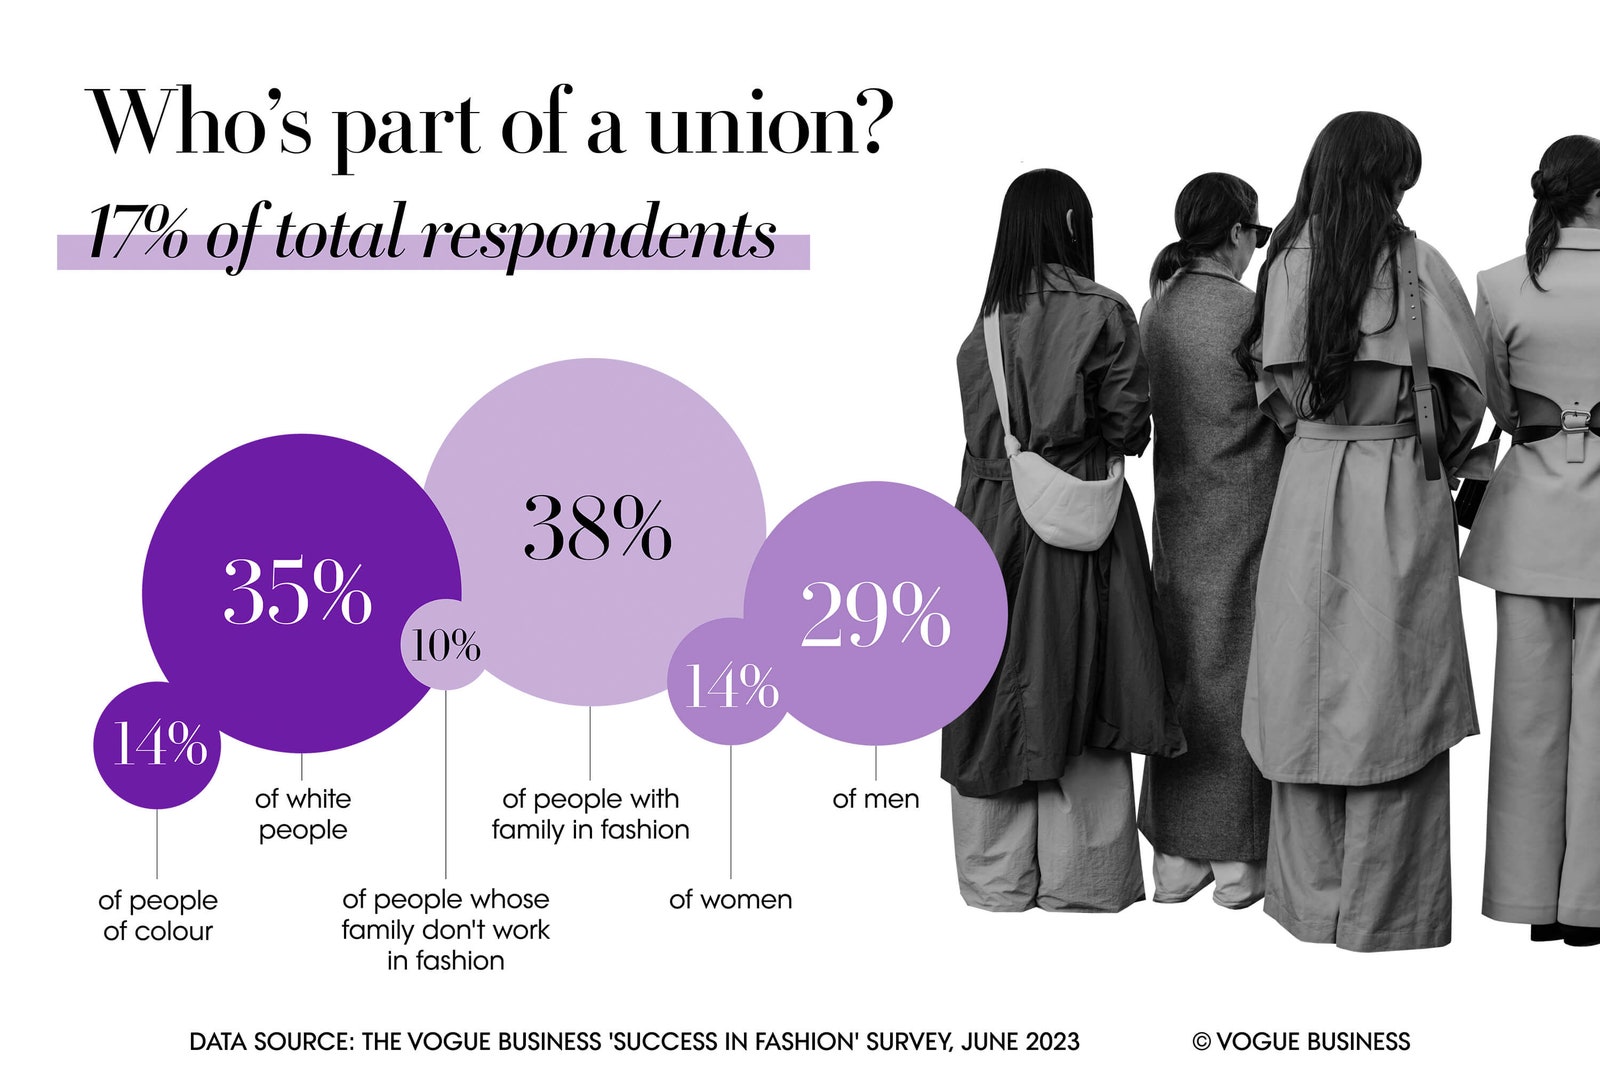 17 per cent of total survey respondents were part of a union. 14 per cent of people of colour were part of a union...